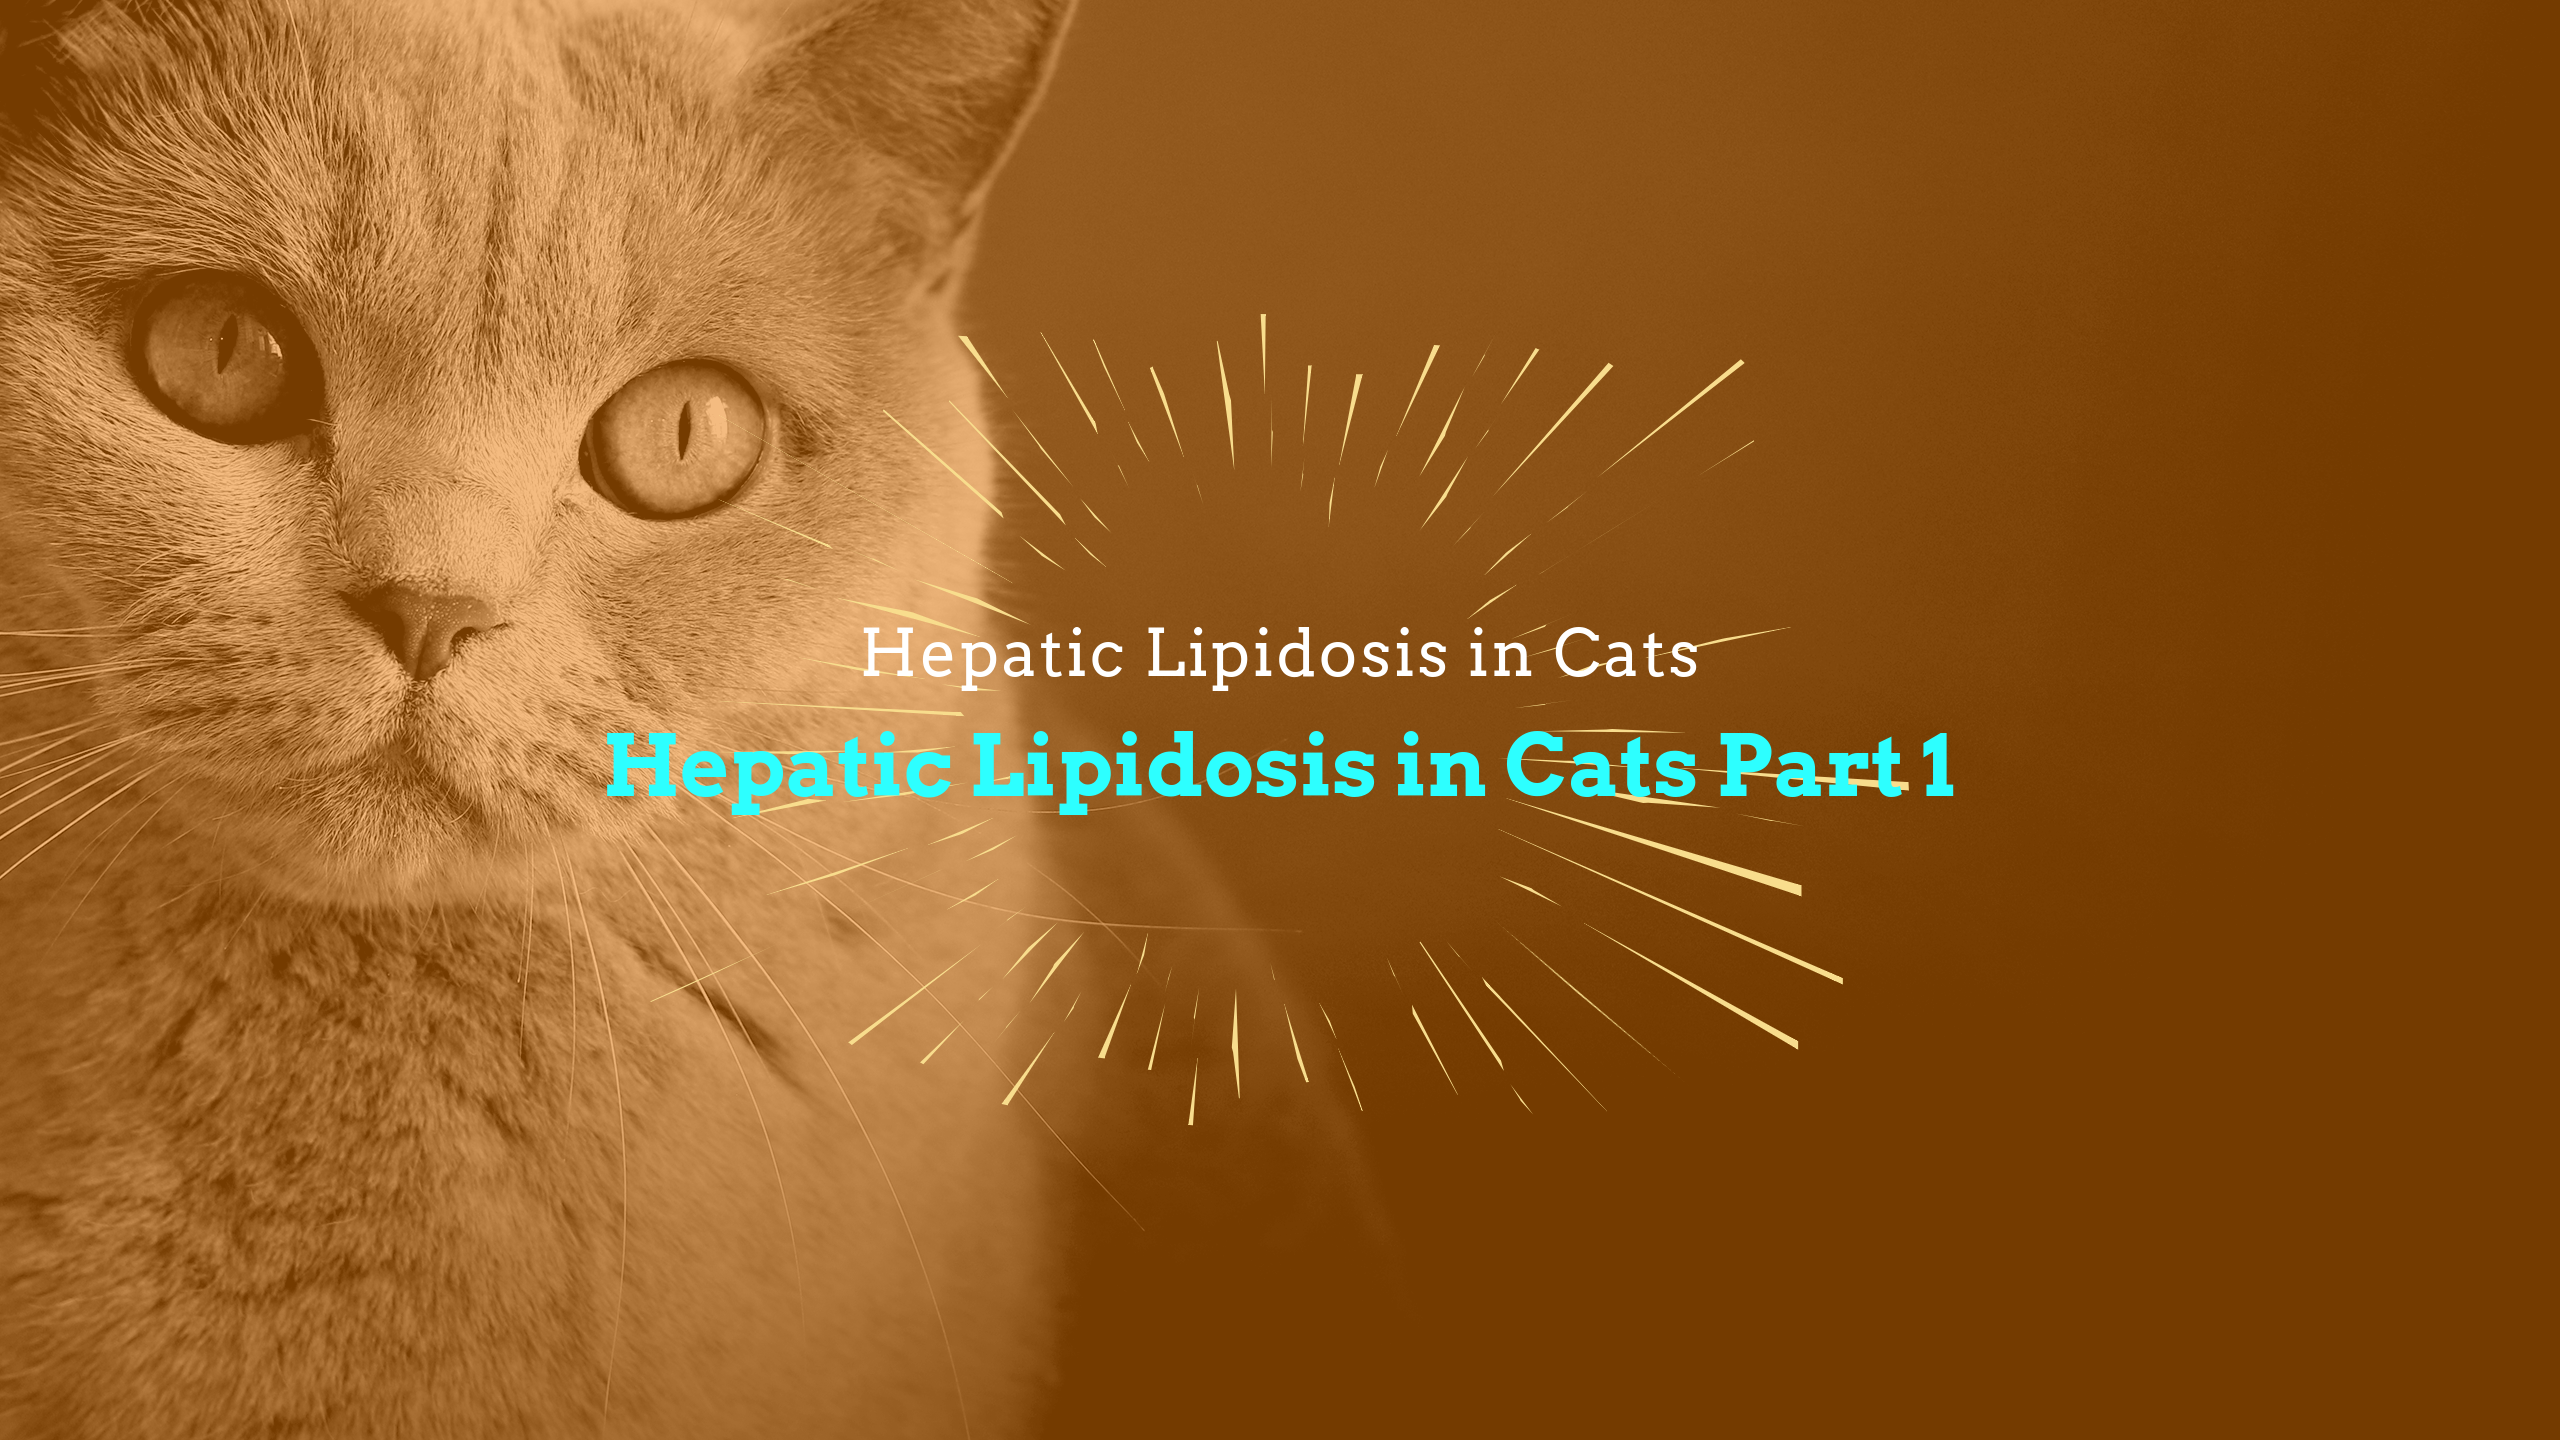 Hepatic Lipidosis in Cats (Fatty Liver Syndrome) Part 1